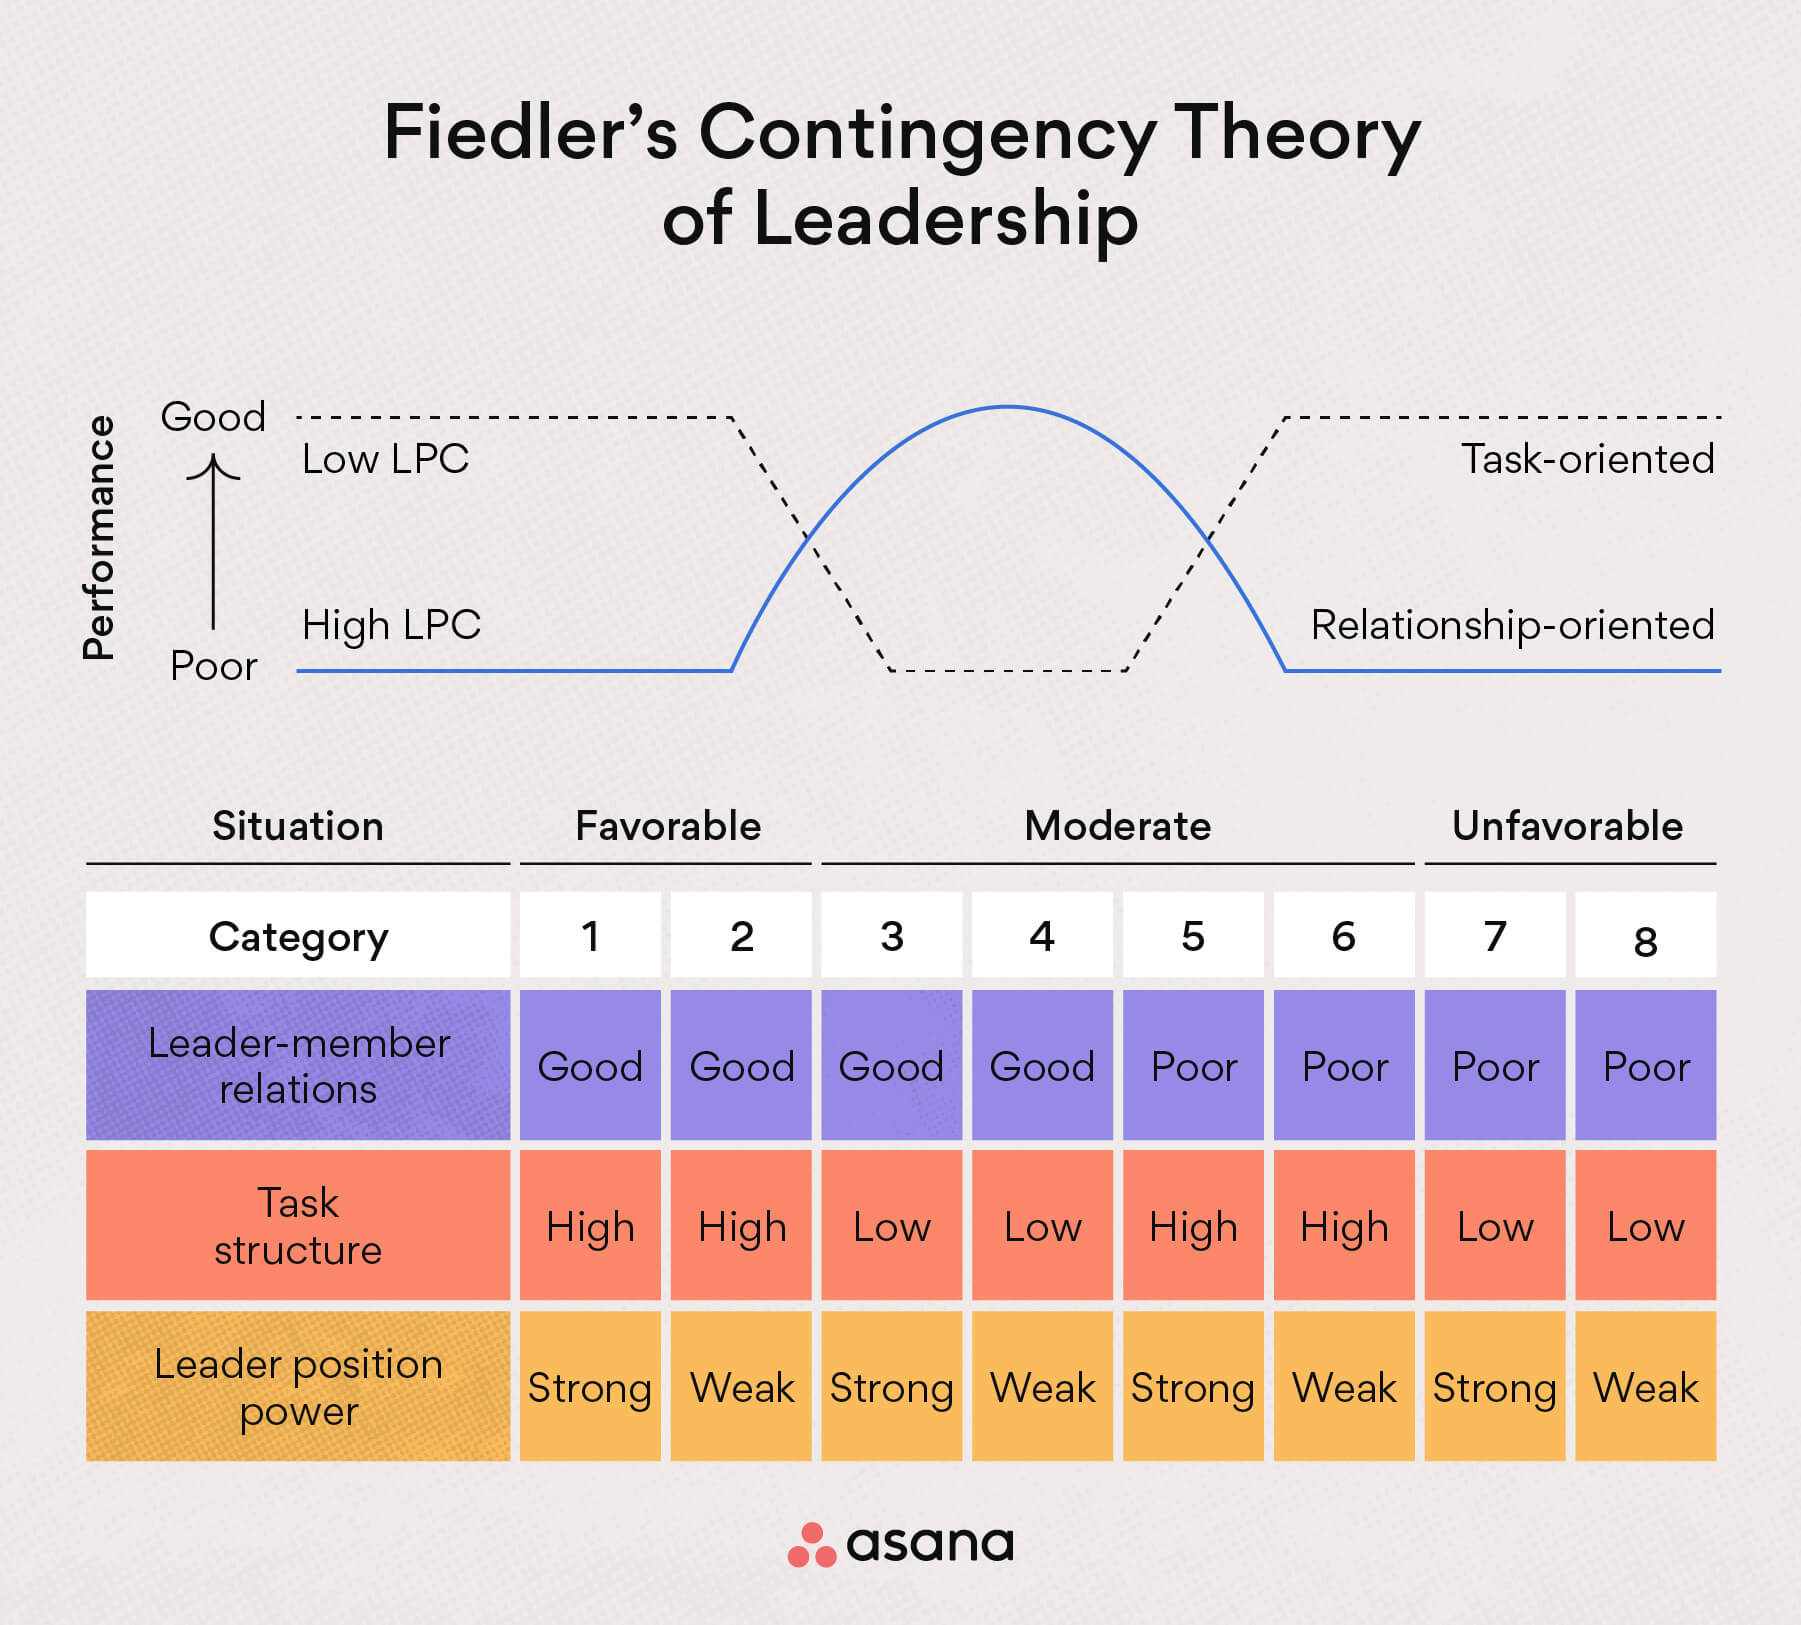 Fiedler's Contingency Theory of Leadership